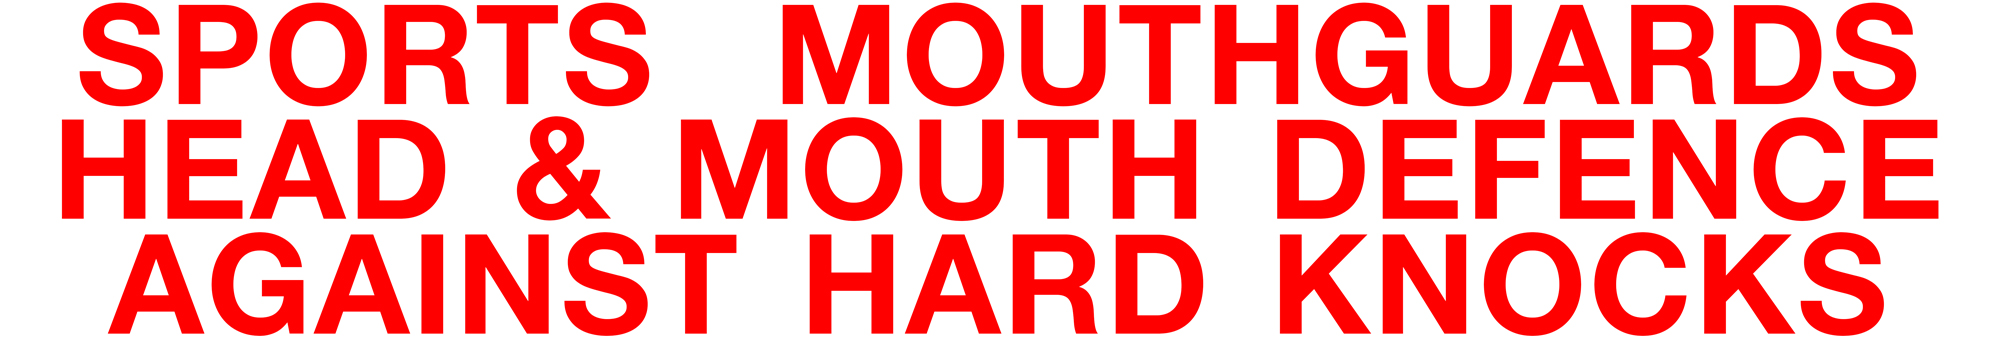 Sports-Mouthguards-Head--Mouth-Defence-Against-Hard-Knocks by Ron Winter of Fabulous Teeth @ Seaside Dental Laboratory & Clinic.jpg